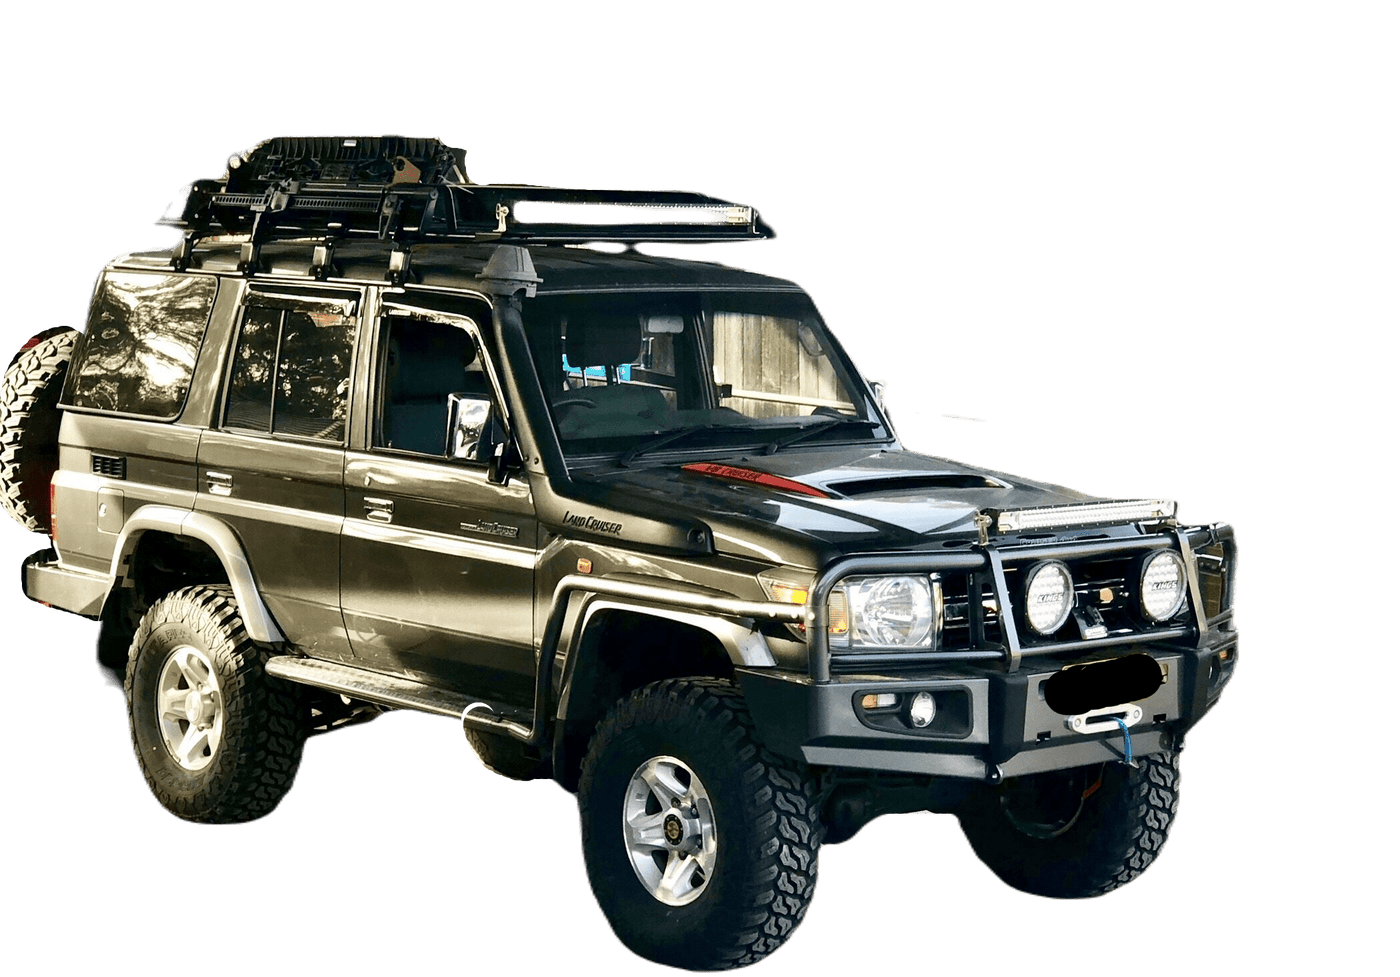 Fixed Mount Side Steps & Brush Bars Suits Toyota Land Cruiser 76 Series 2007-2017